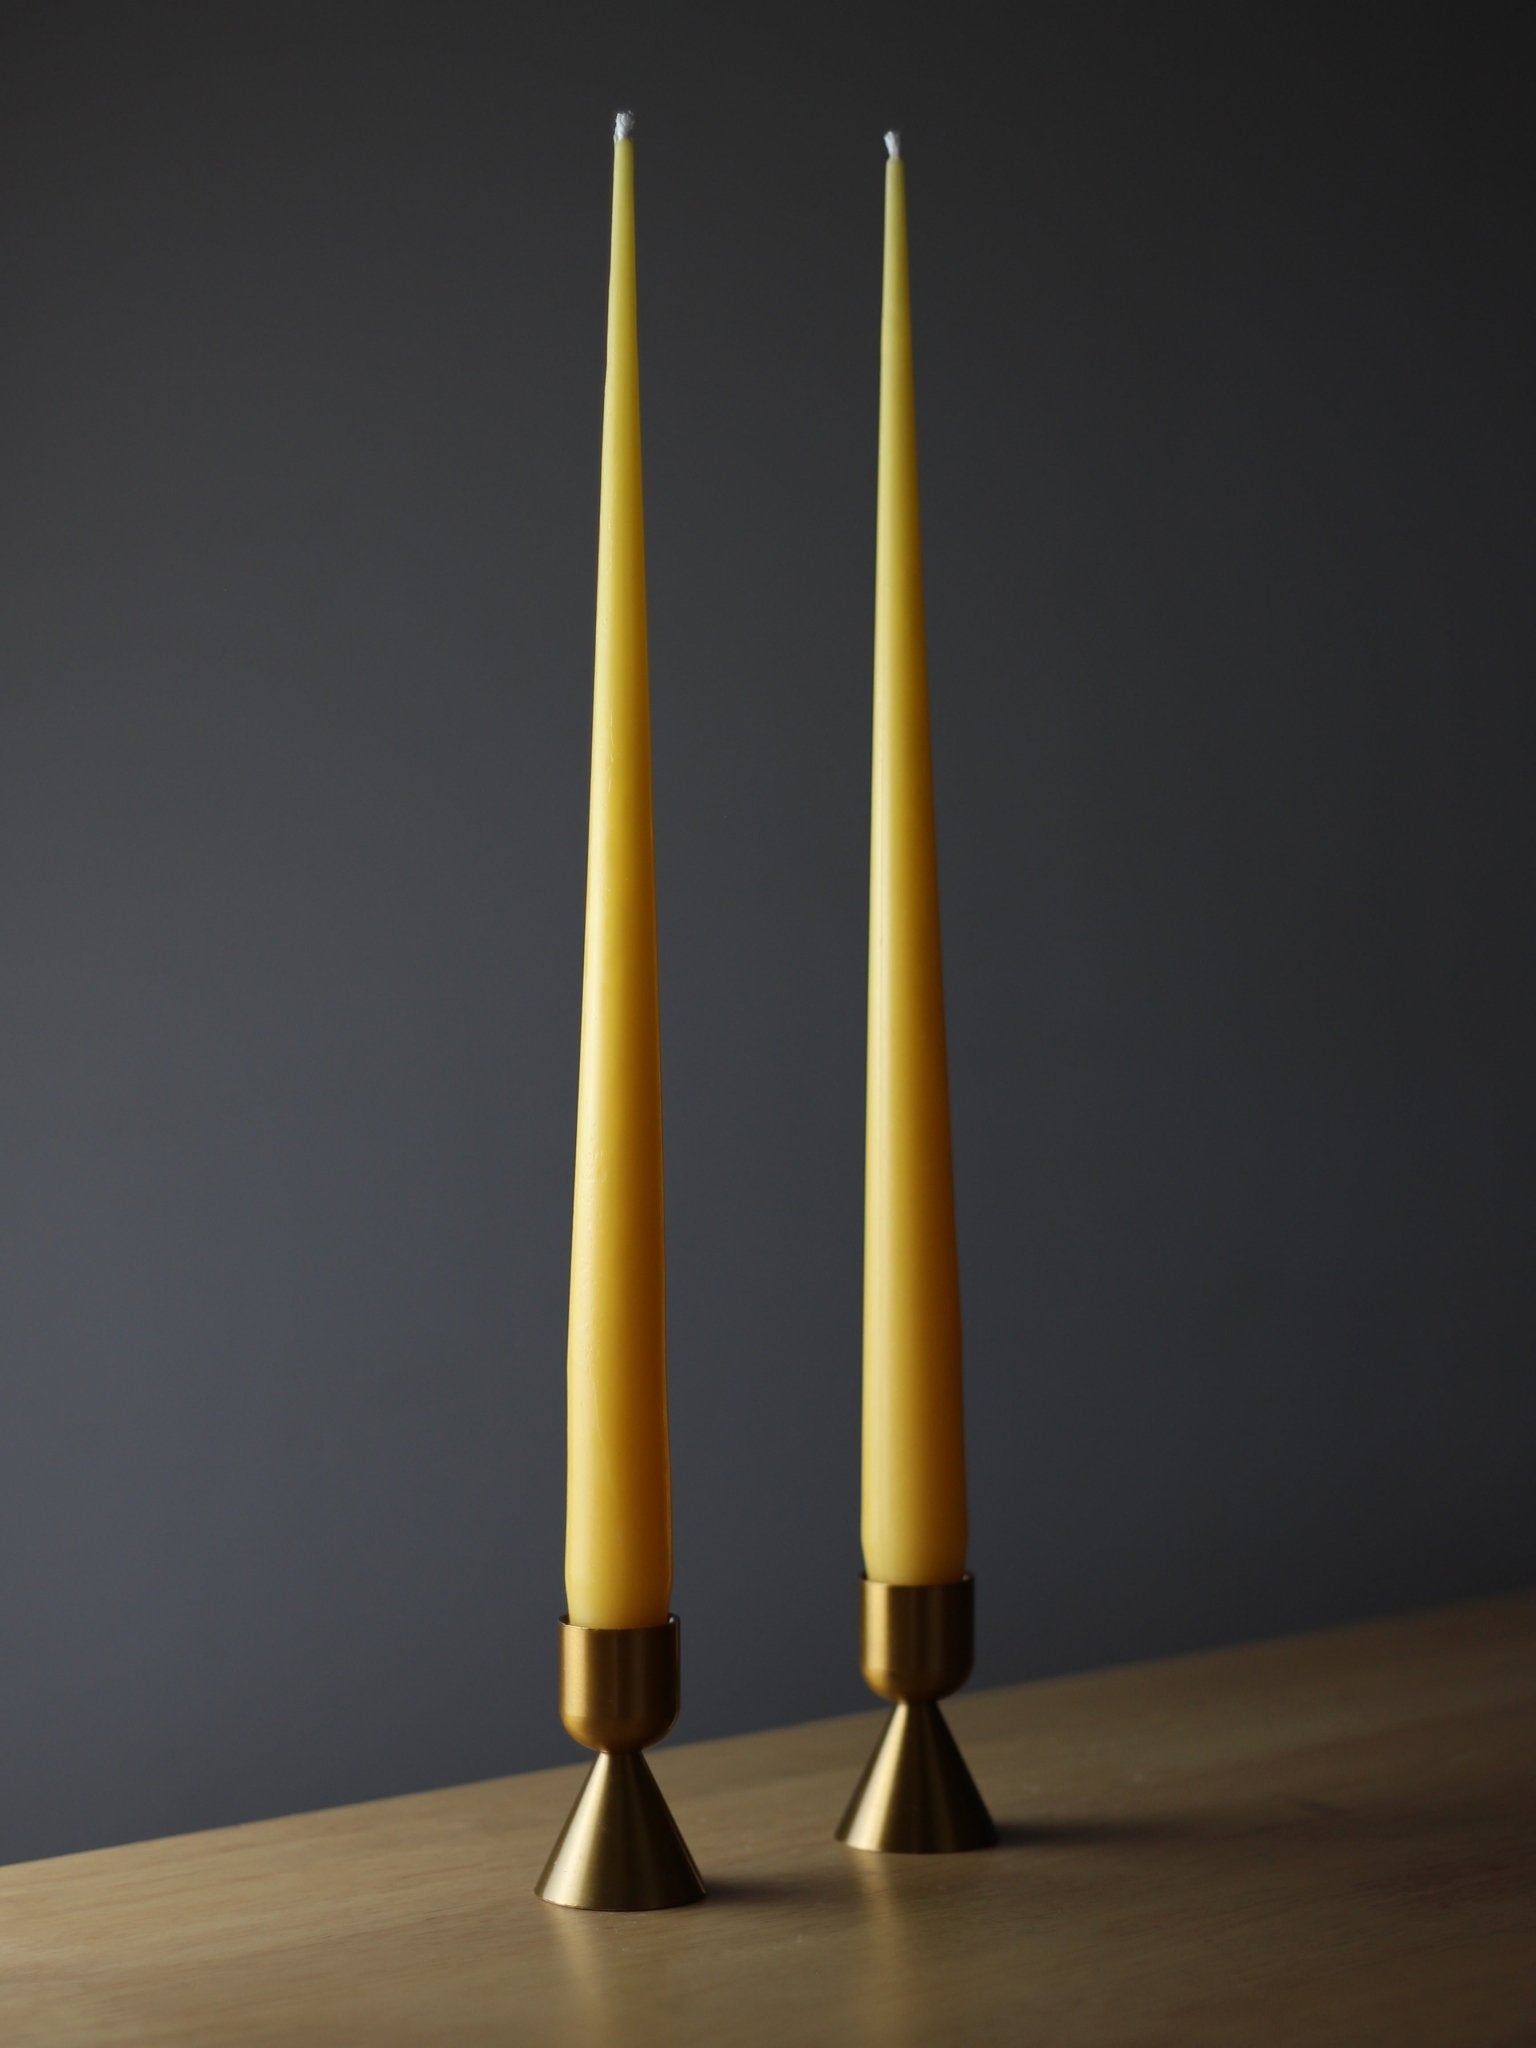 Beeswax Dinner Candles - Very Thins - BZZWAX